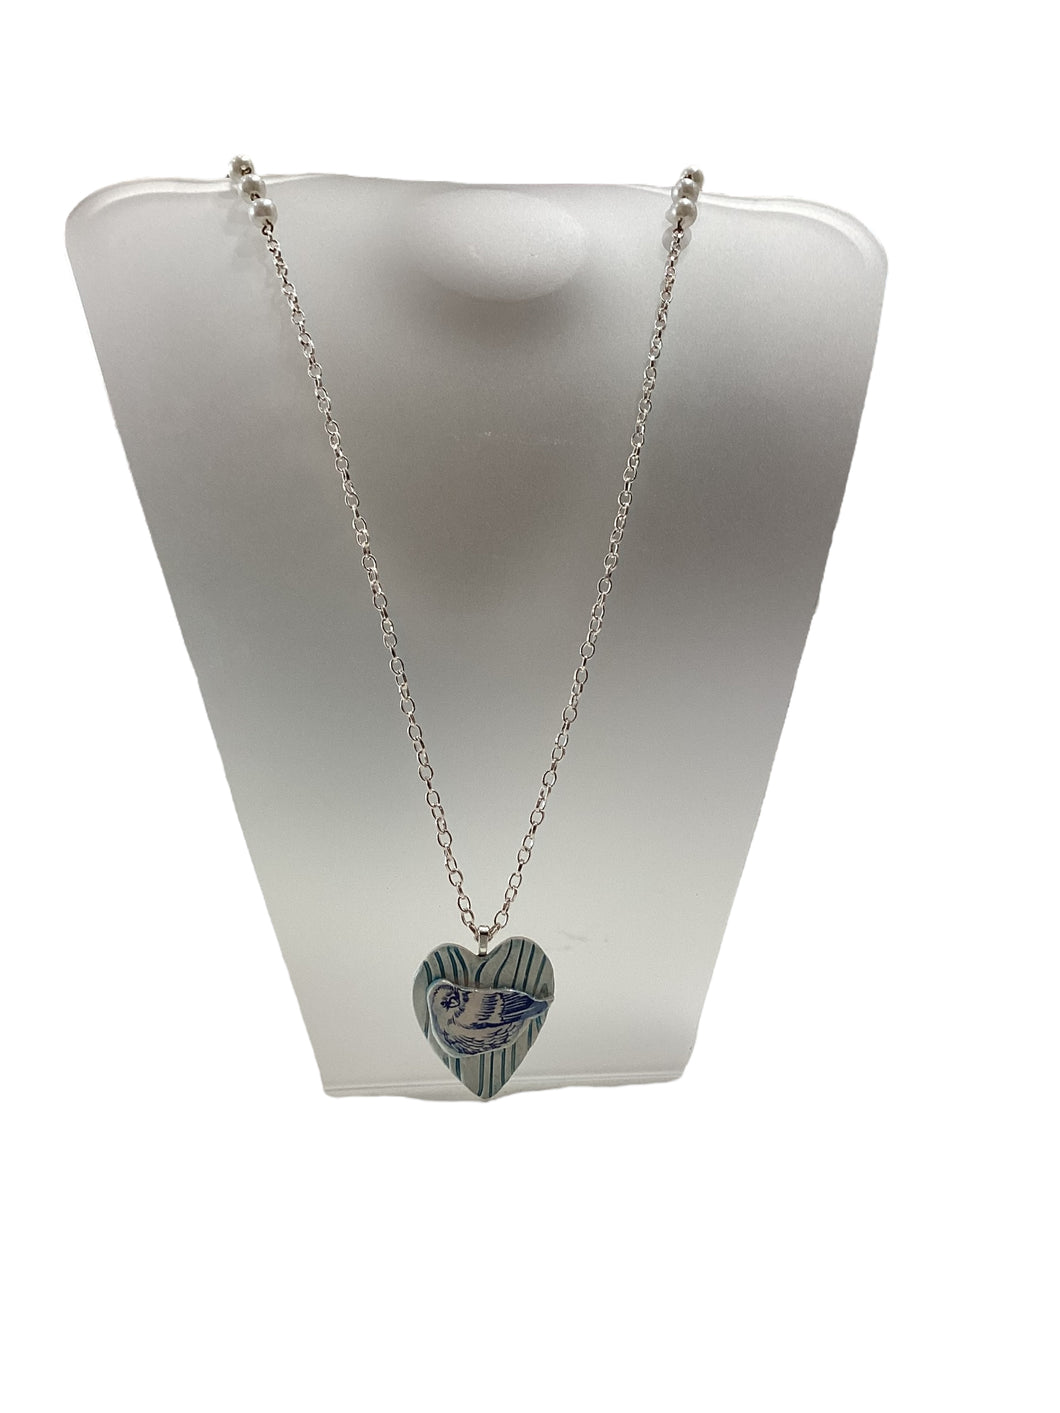 Bird & Heart Blue Porcelain/Ceramic with Silver & Pearl Necklace